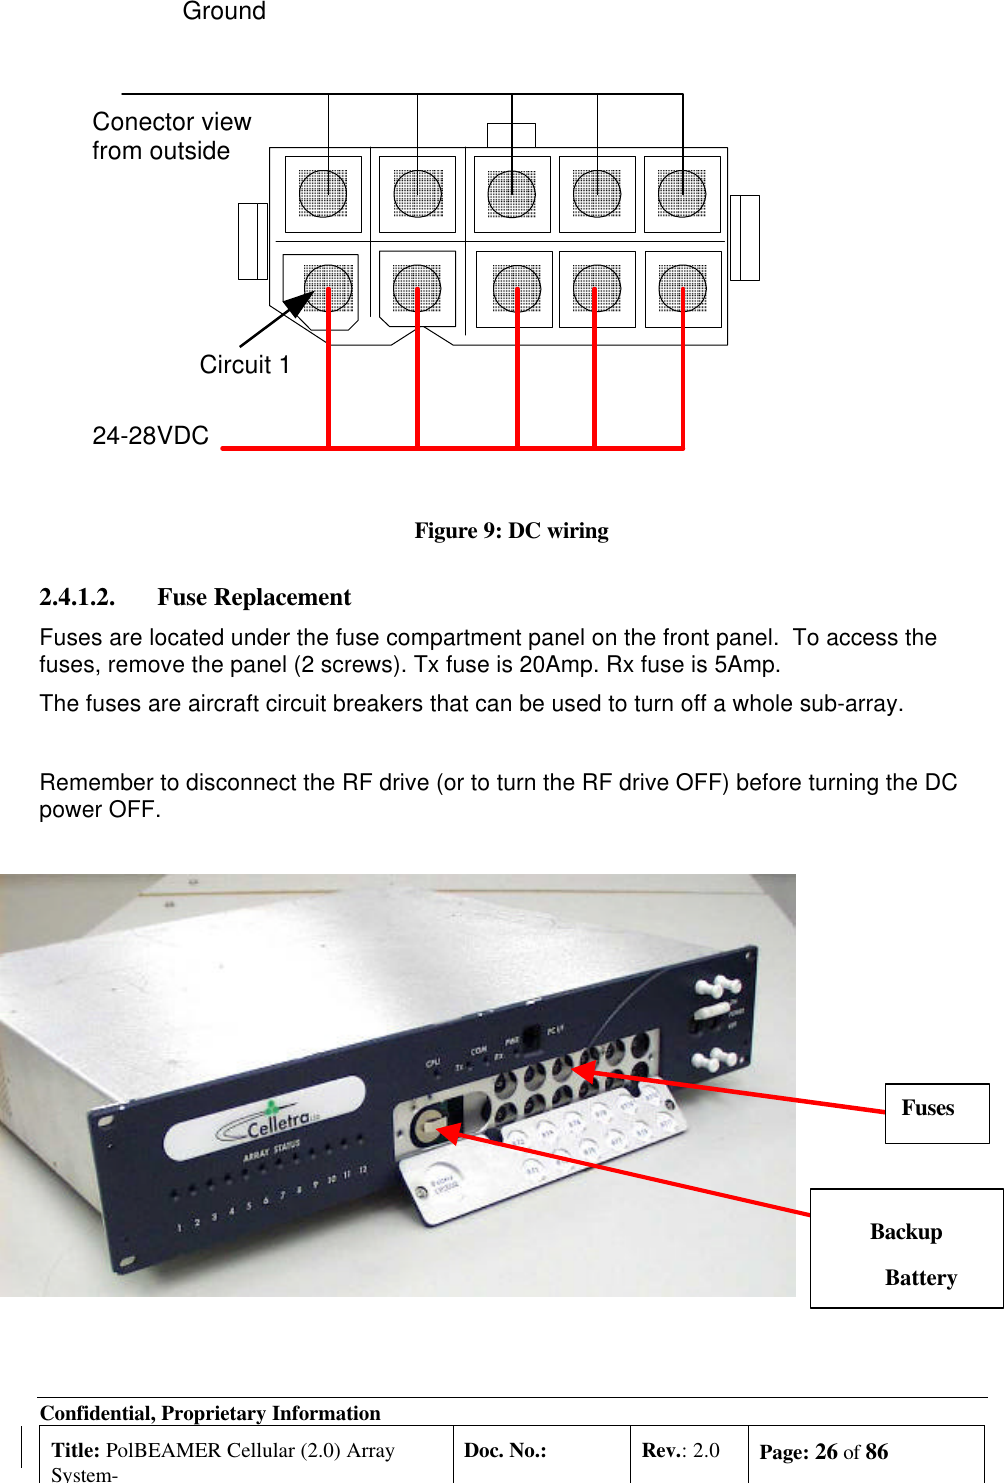 Confidential, Proprietary InformationTitle: PolBEAMER Cellular (2.0) ArraySystem-Doc. No.: Rev.: 2.0 Page: 26 of 86Figure 9: DC wiring2.4.1.2. Fuse ReplacementFuses are located under the fuse compartment panel on the front panel.  To access thefuses, remove the panel (2 screws). Tx fuse is 20Amp. Rx fuse is 5Amp.The fuses are aircraft circuit breakers that can be used to turn off a whole sub-array.Remember to disconnect the RF drive (or to turn the RF drive OFF) before turning the DCpower OFF.Conector viewfrom outside24-28VDCGroundCircuit 1BackupBatteryFuses